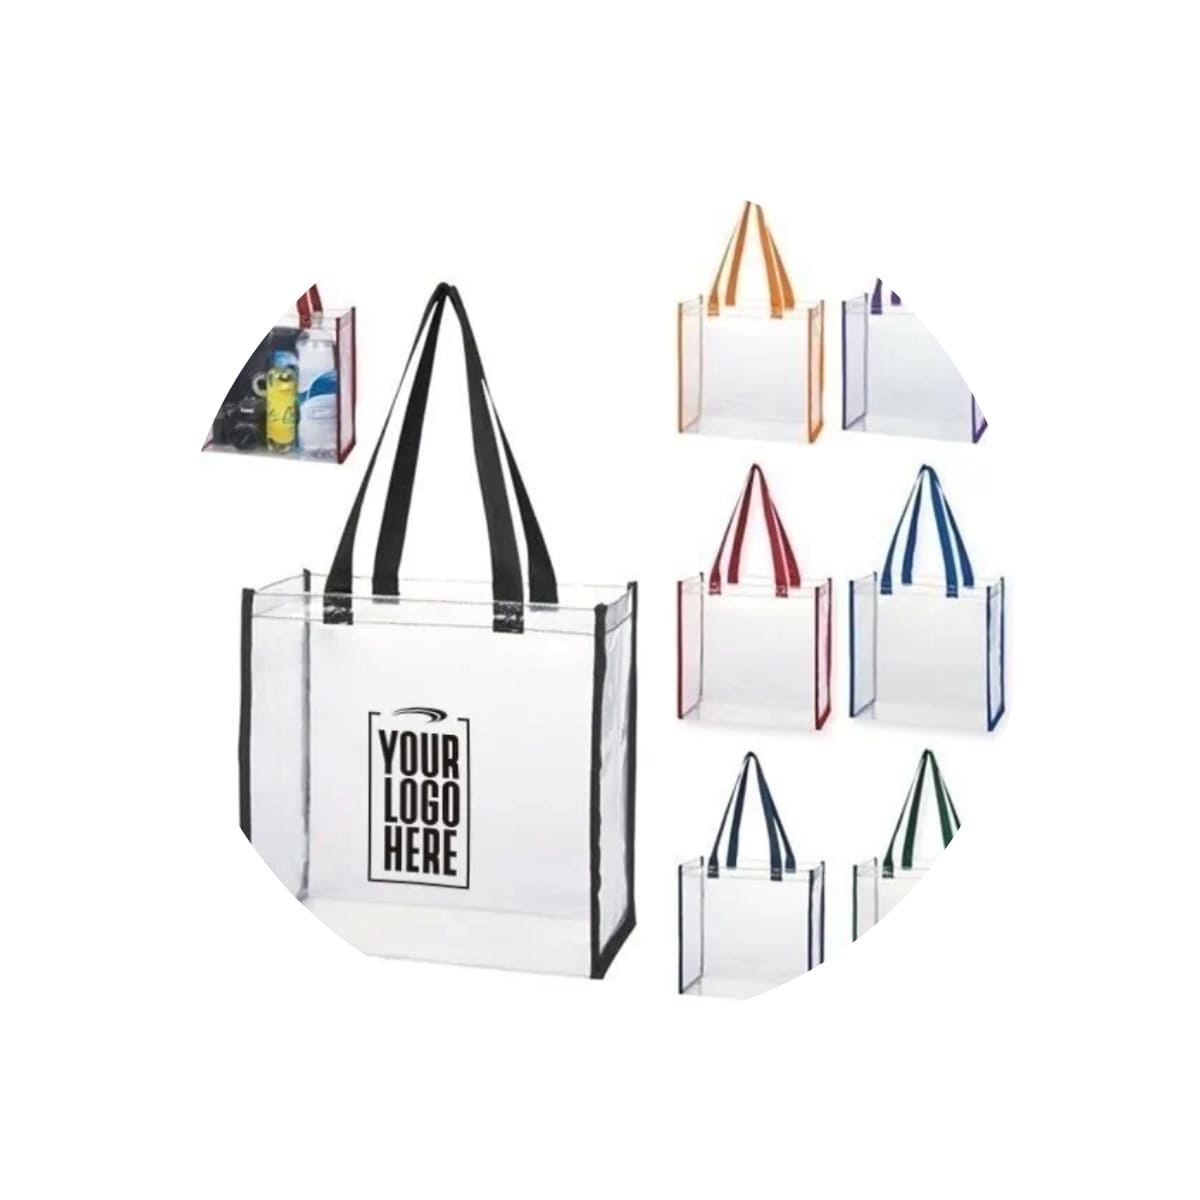 How do people use tote bags?